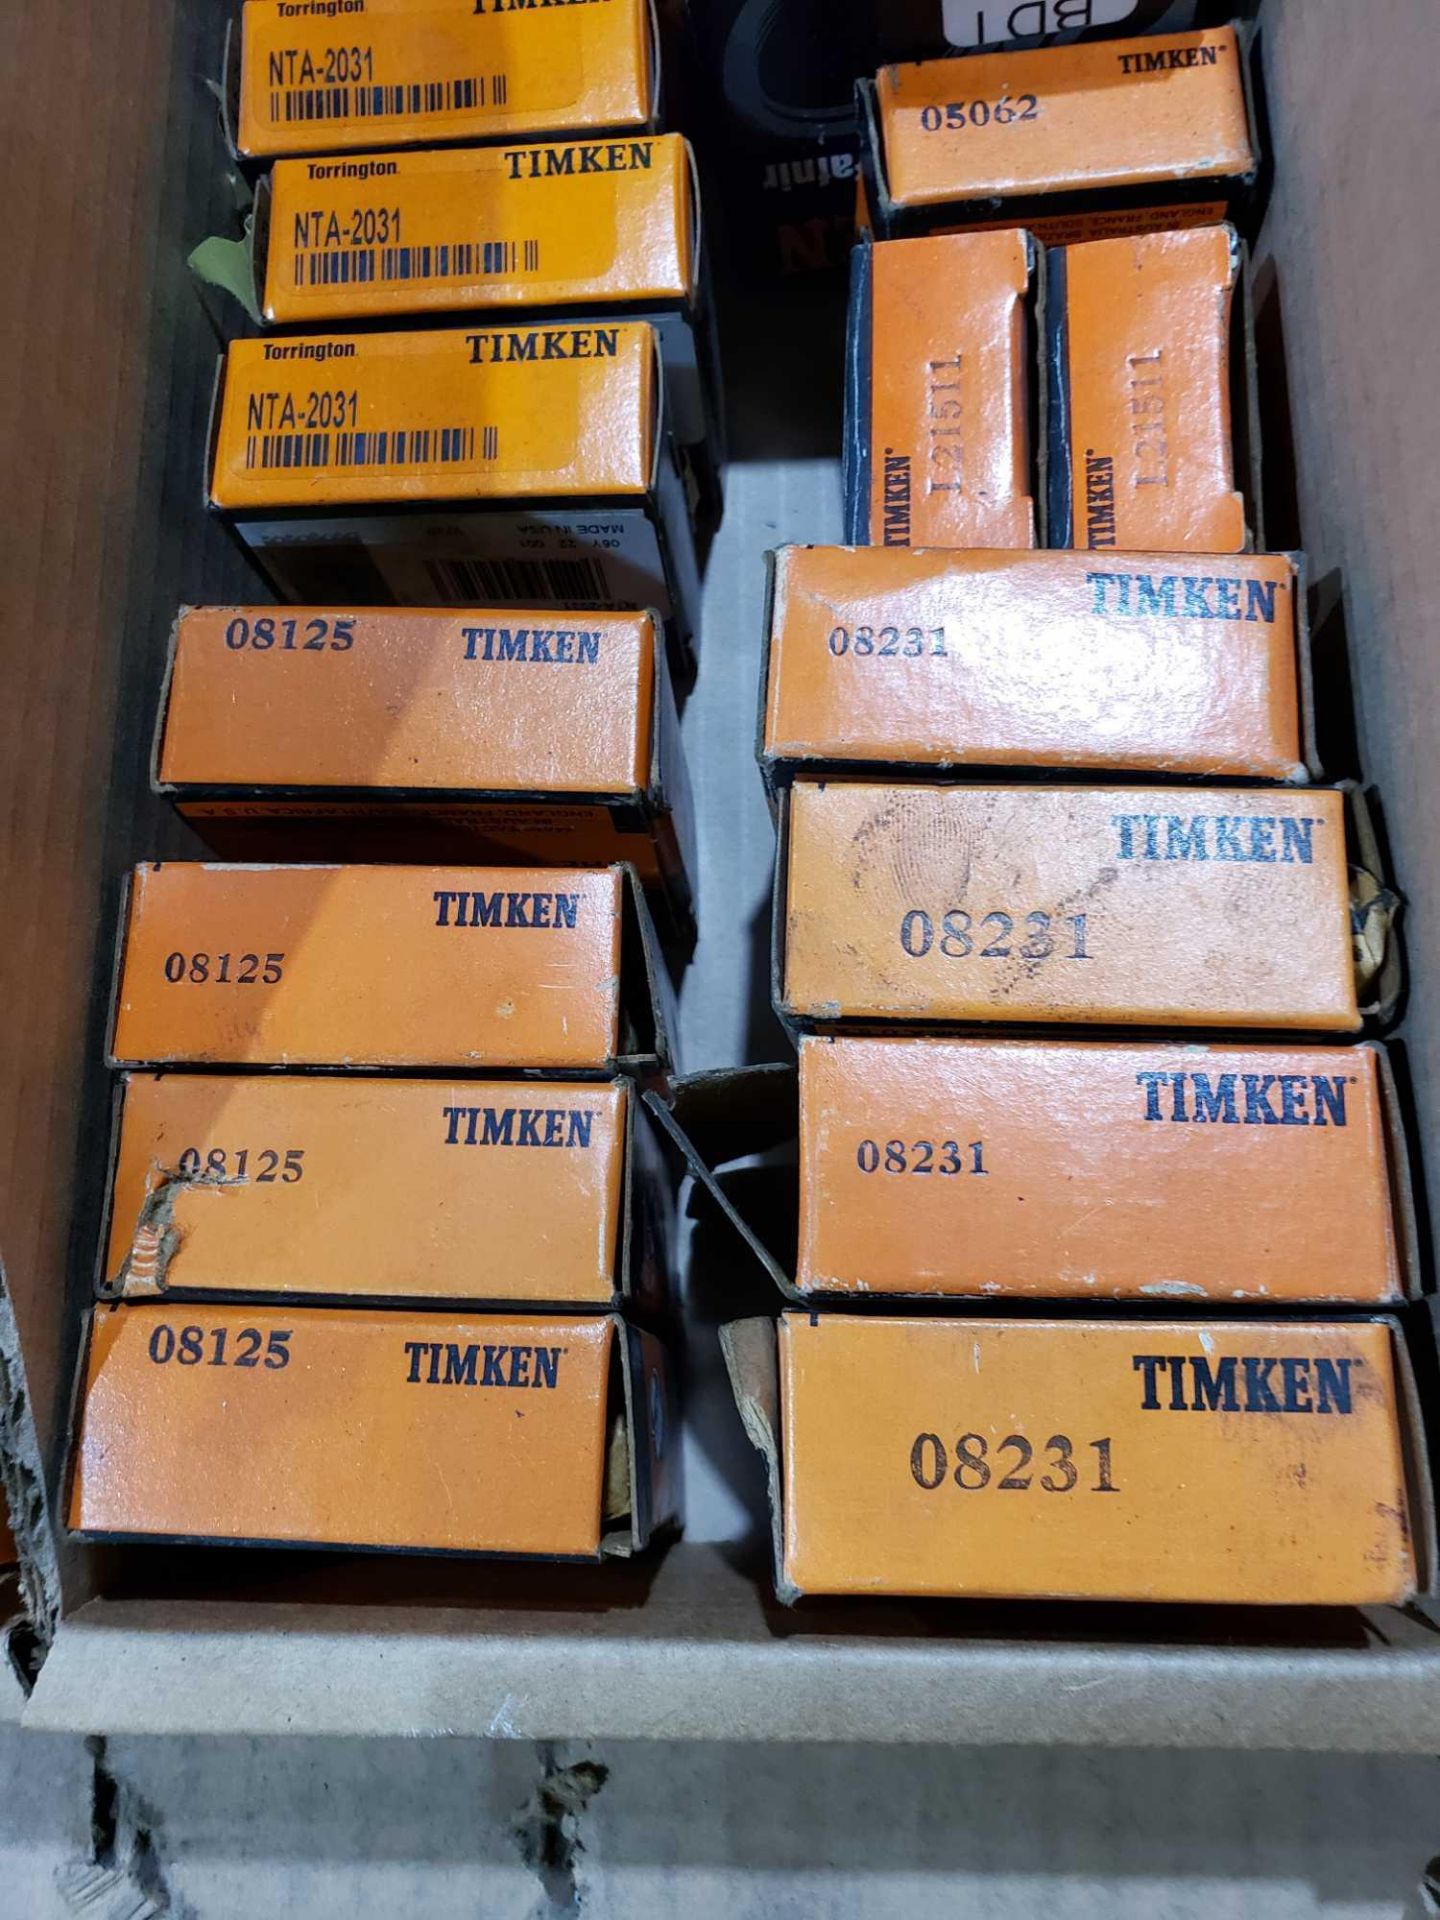 Qty 19 - Timken bearings, assorted part numbers. New in boxes as pictured. - Image 3 of 3